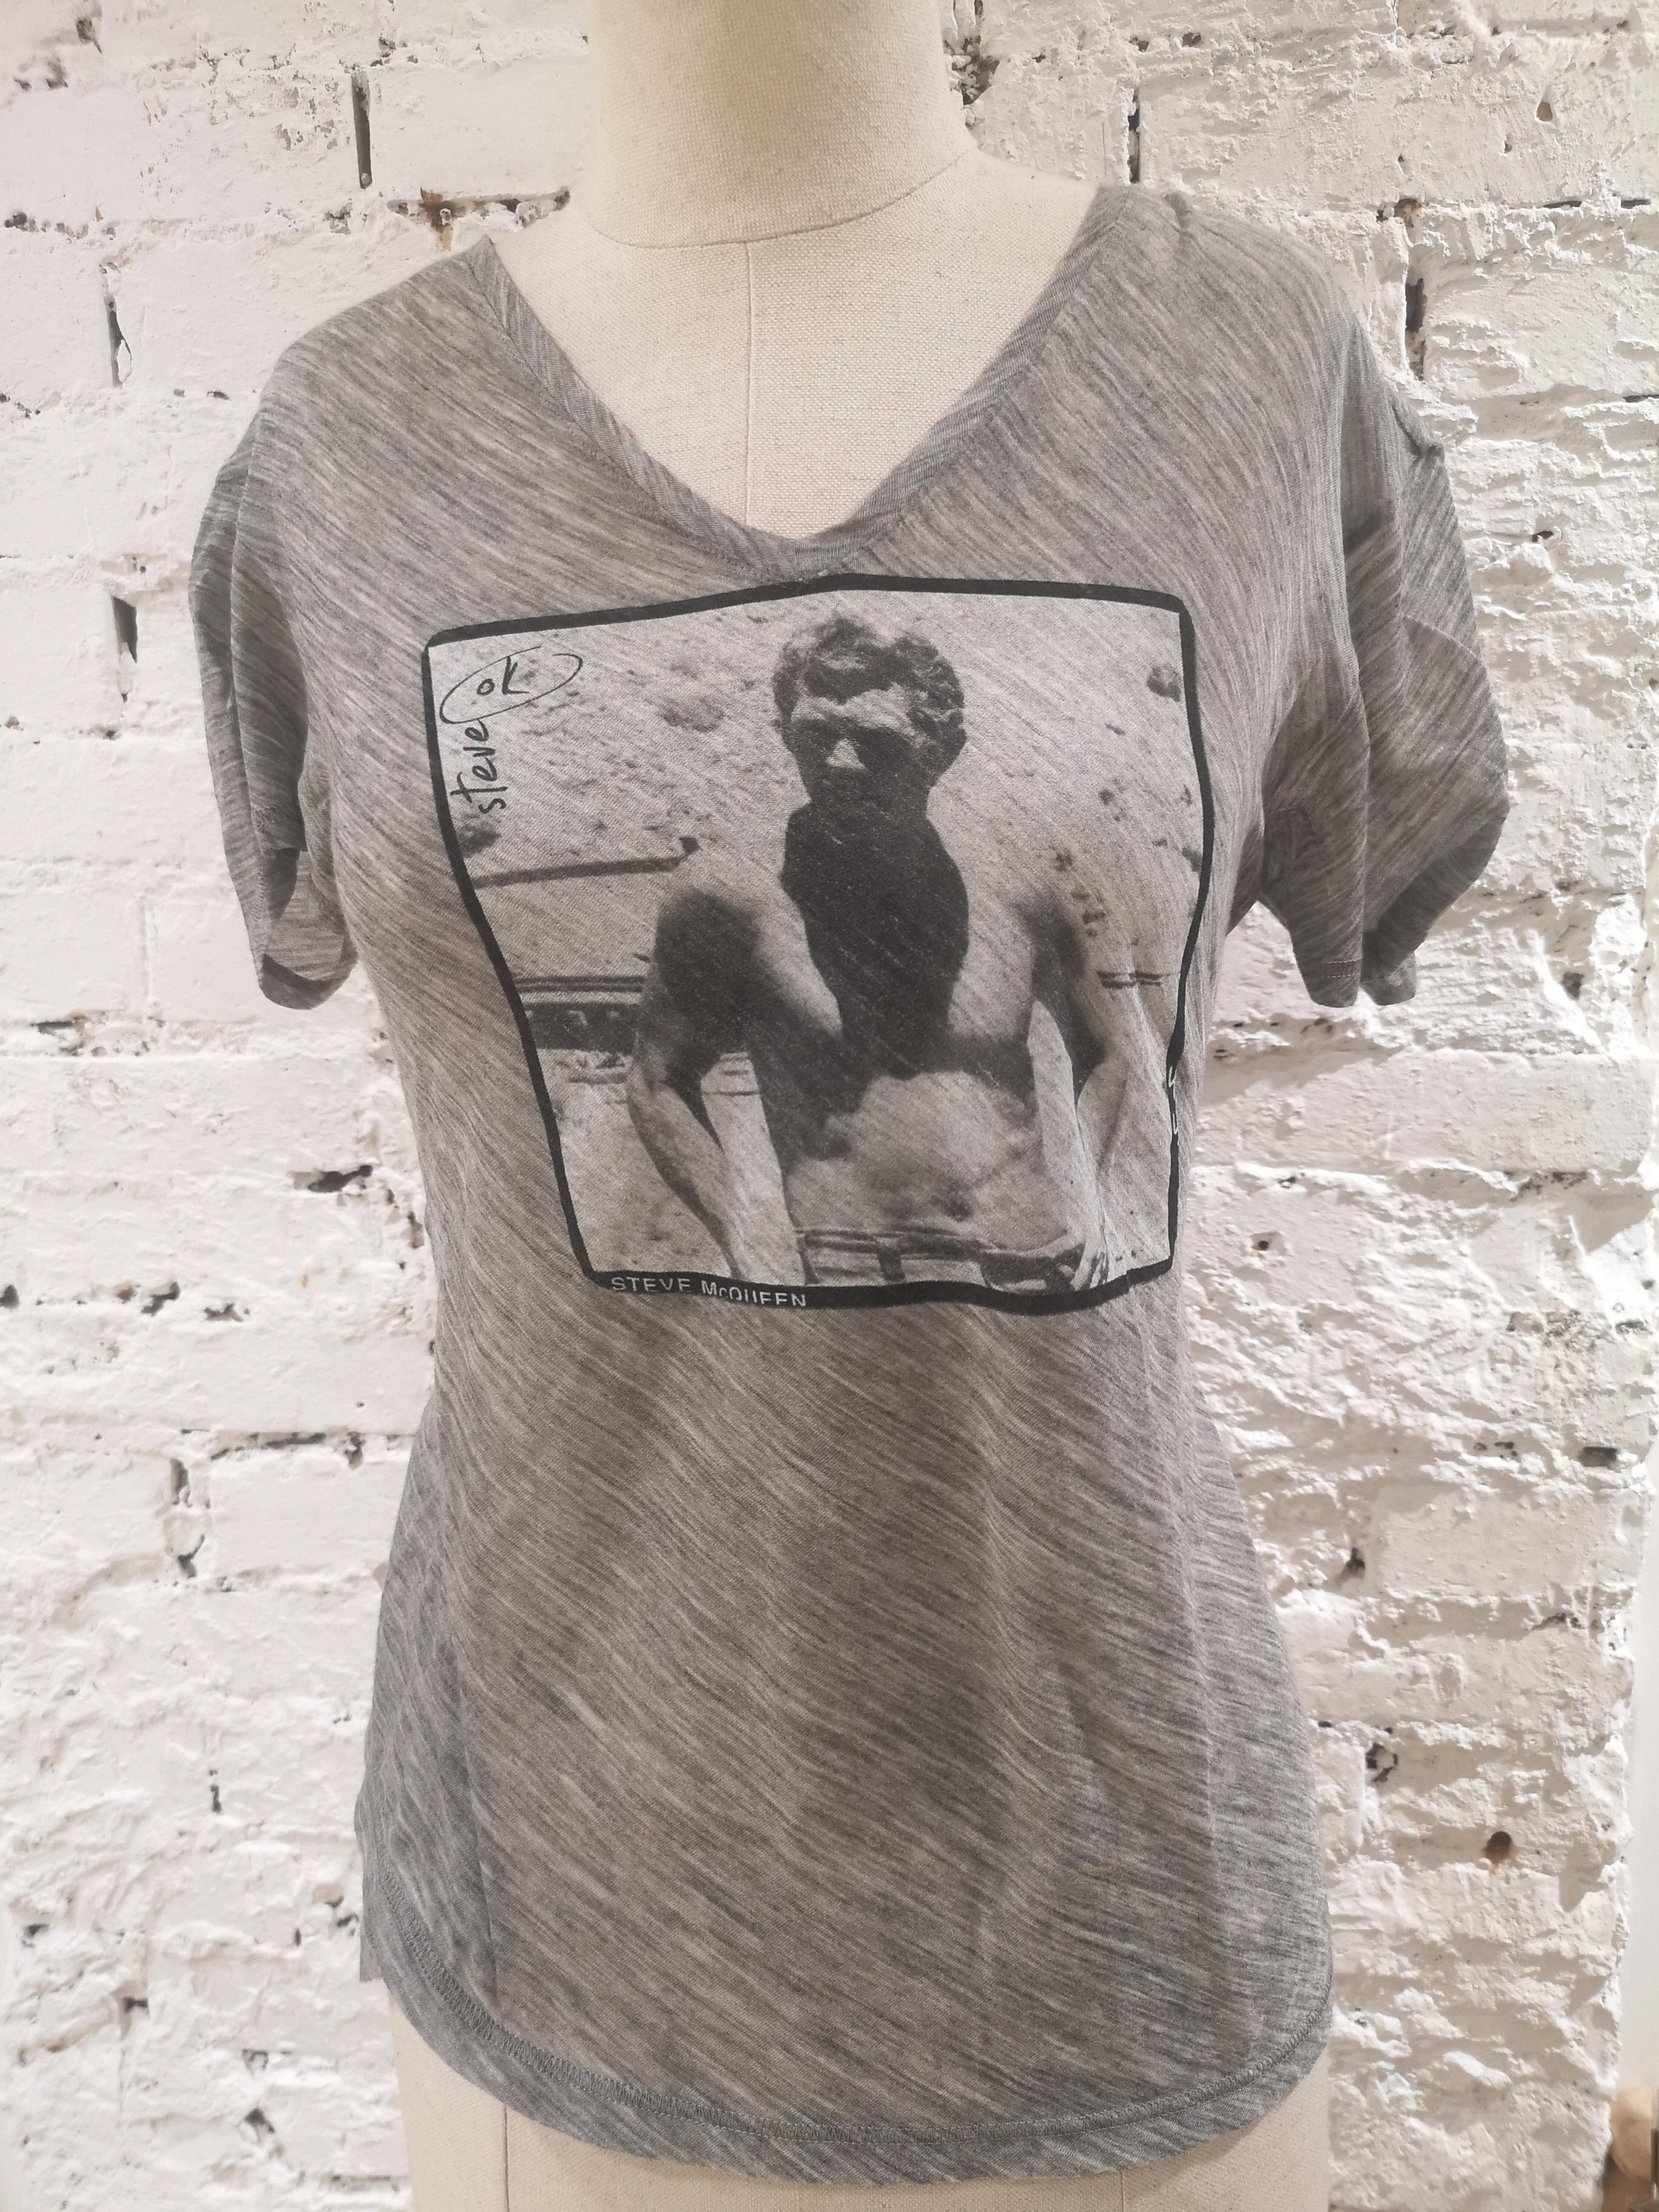 Dolce & Gabbana Steve McQueen grey t-shirt
Grey t-shirt totally made in italy in size 46